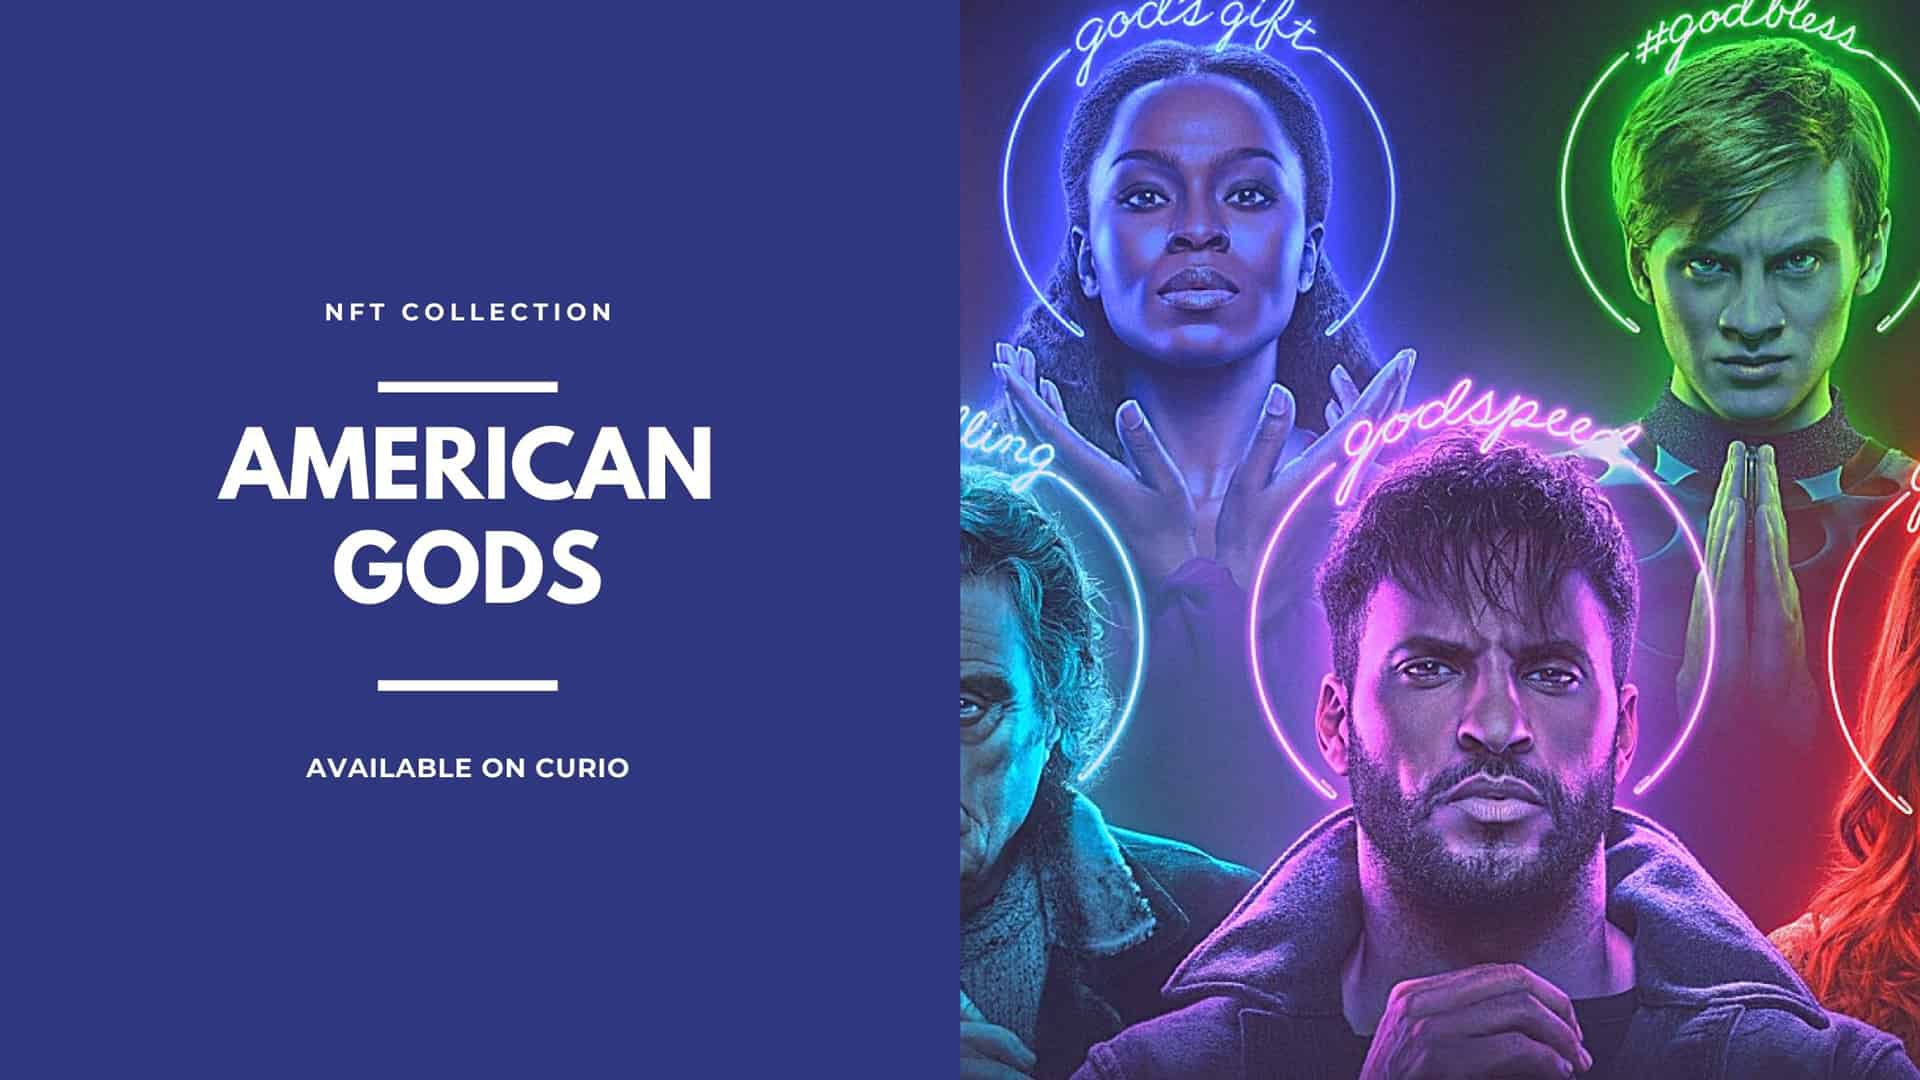 american gods side Curio - a platform for the entertainment and arts sector that connects fans with their favorite TV shows and characters through authentic digital collectibles - has launched American Gods: Motel America, the second collection of officially licensed NFTs for season 2 of the American Gods TV series.